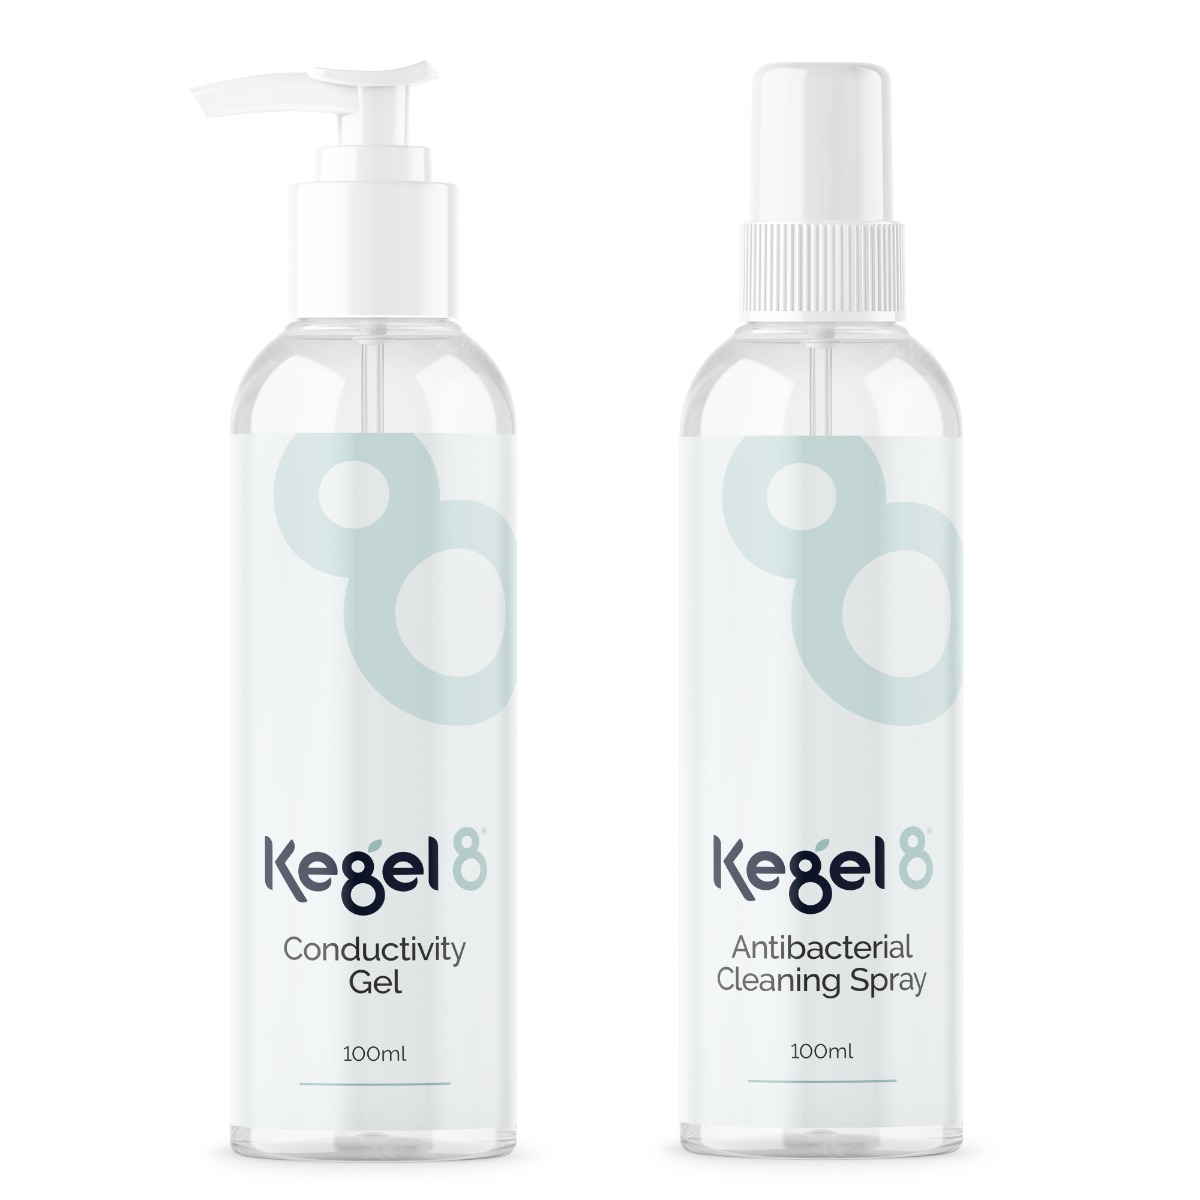 Kegel8 Lubricant and Care Pack 1